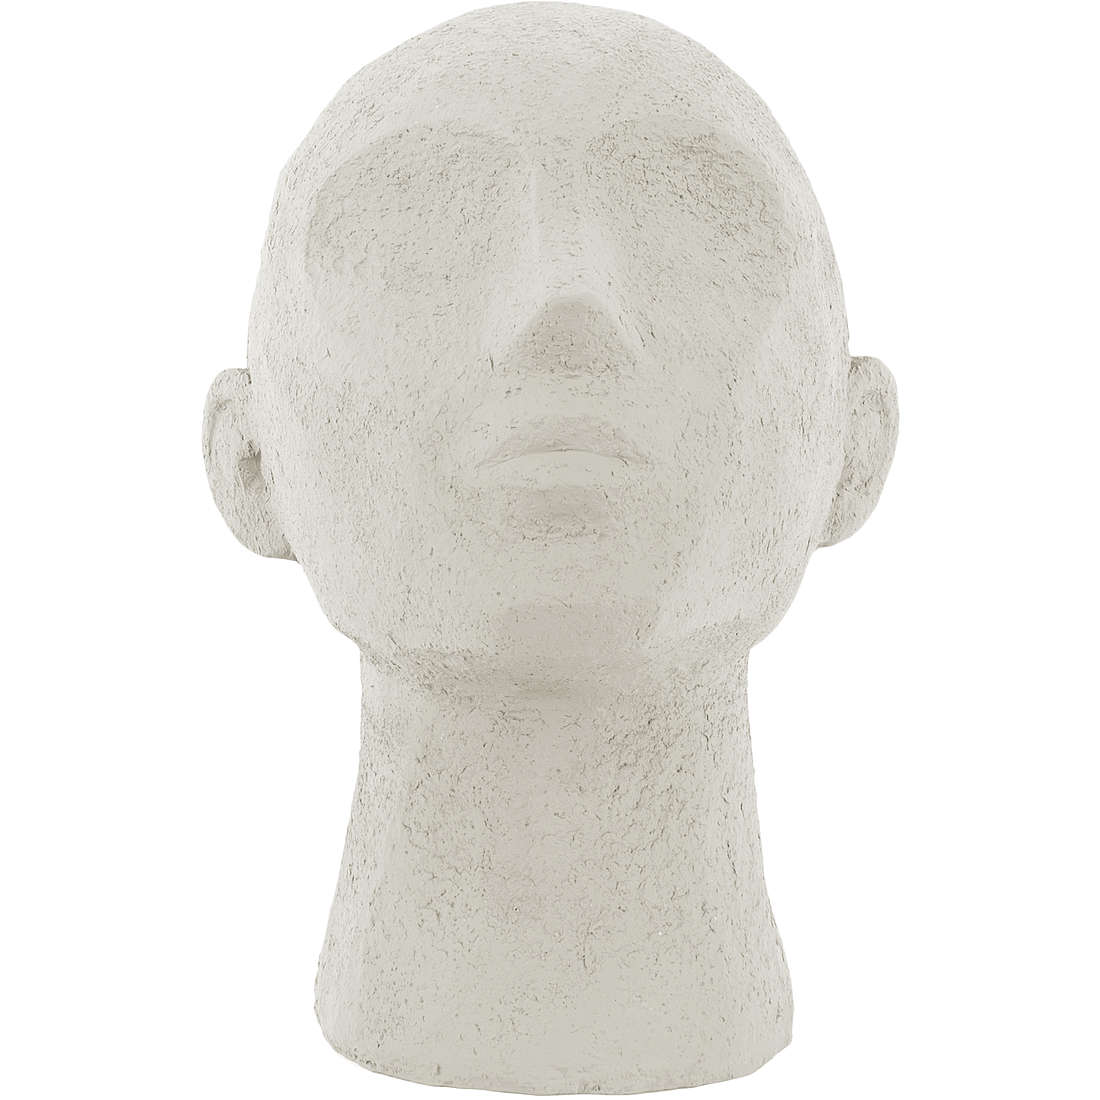 giftwares Present Time Statue Face Art PT3559WH